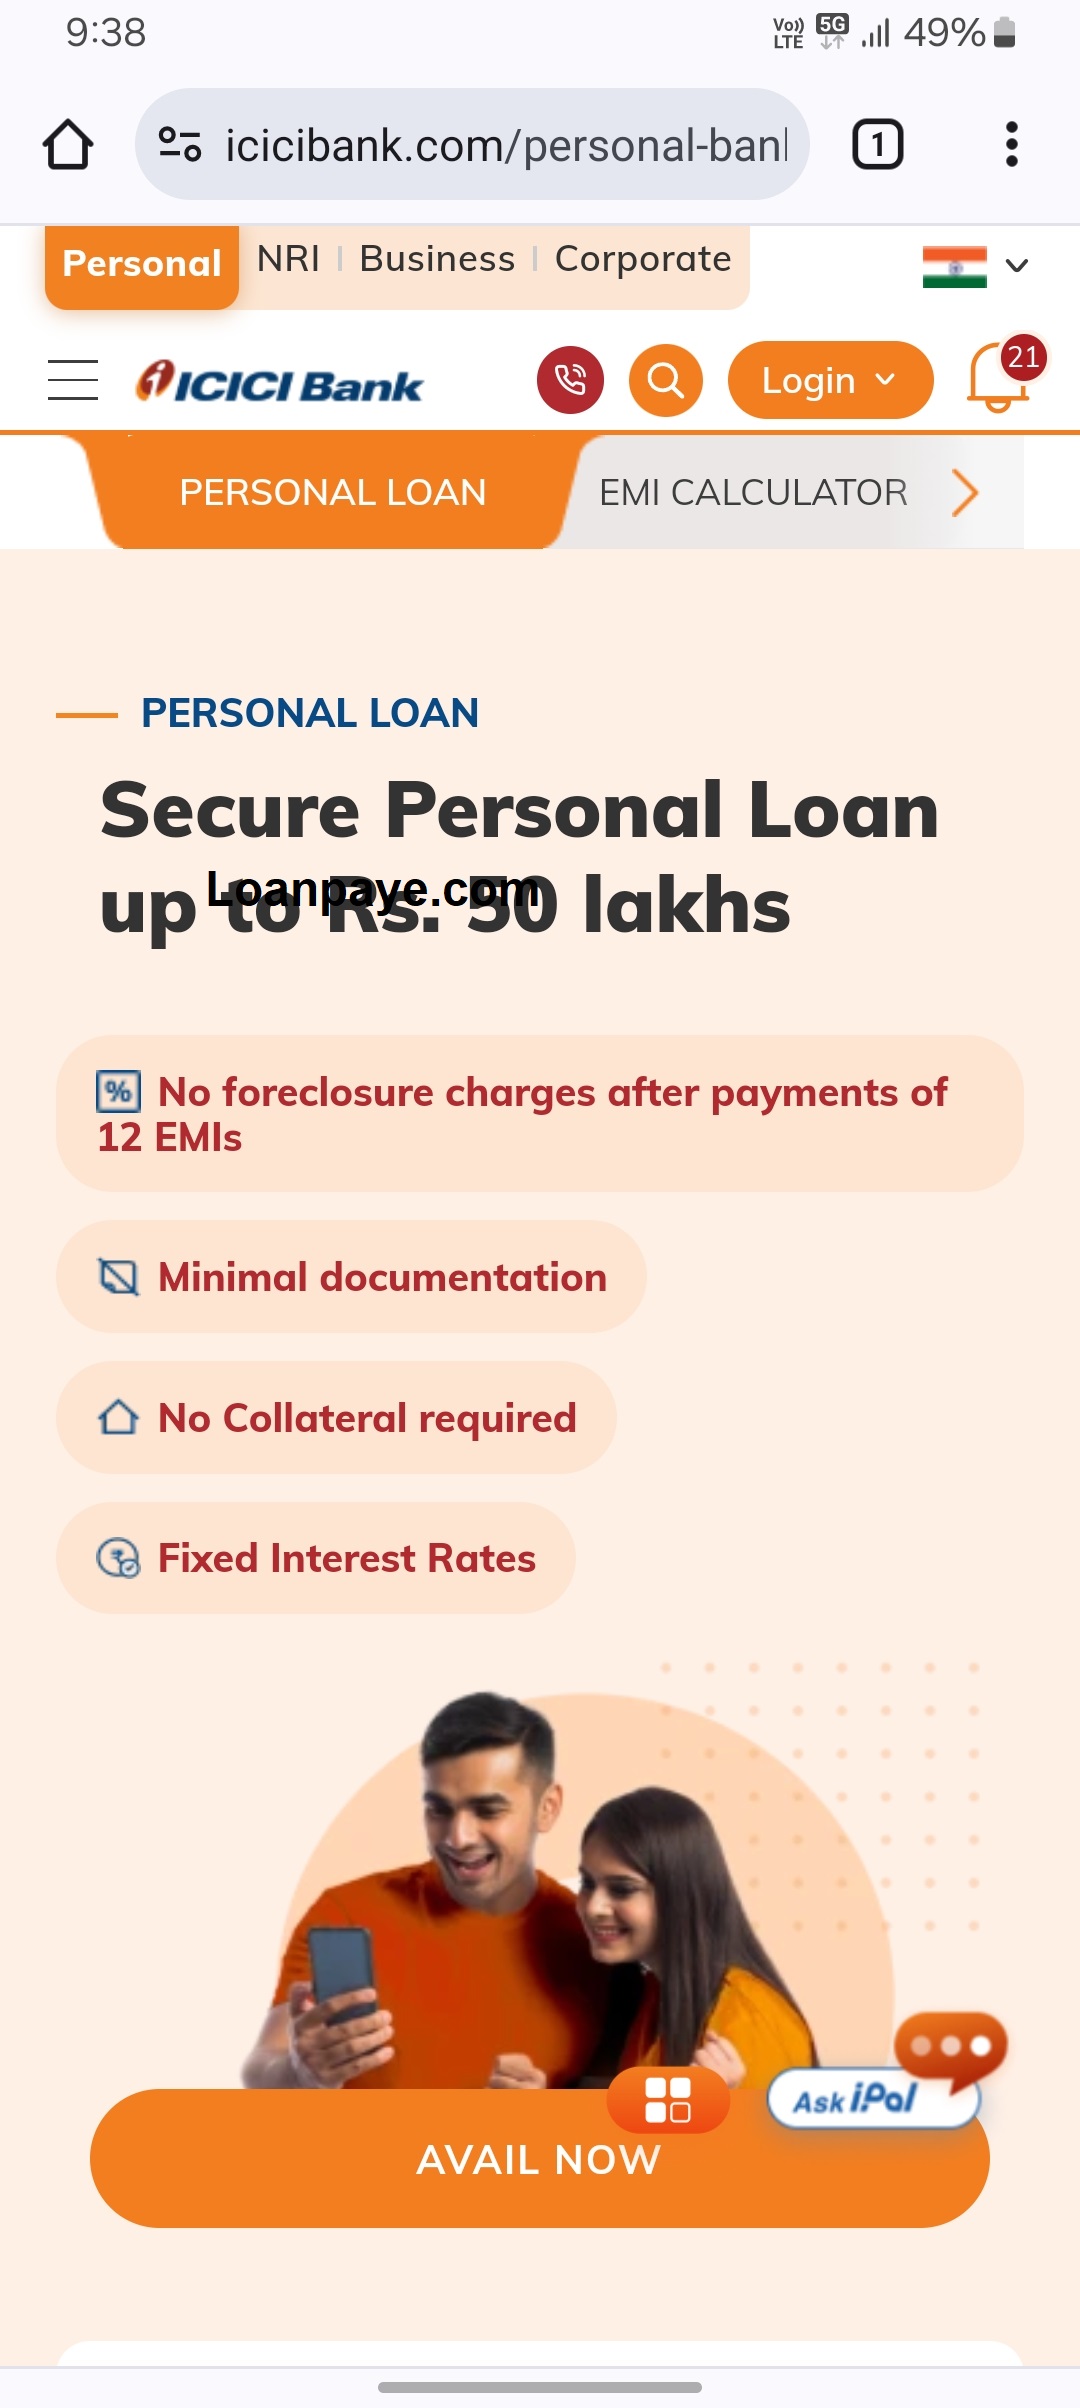 ICICI Bank personal loan apply process step by step